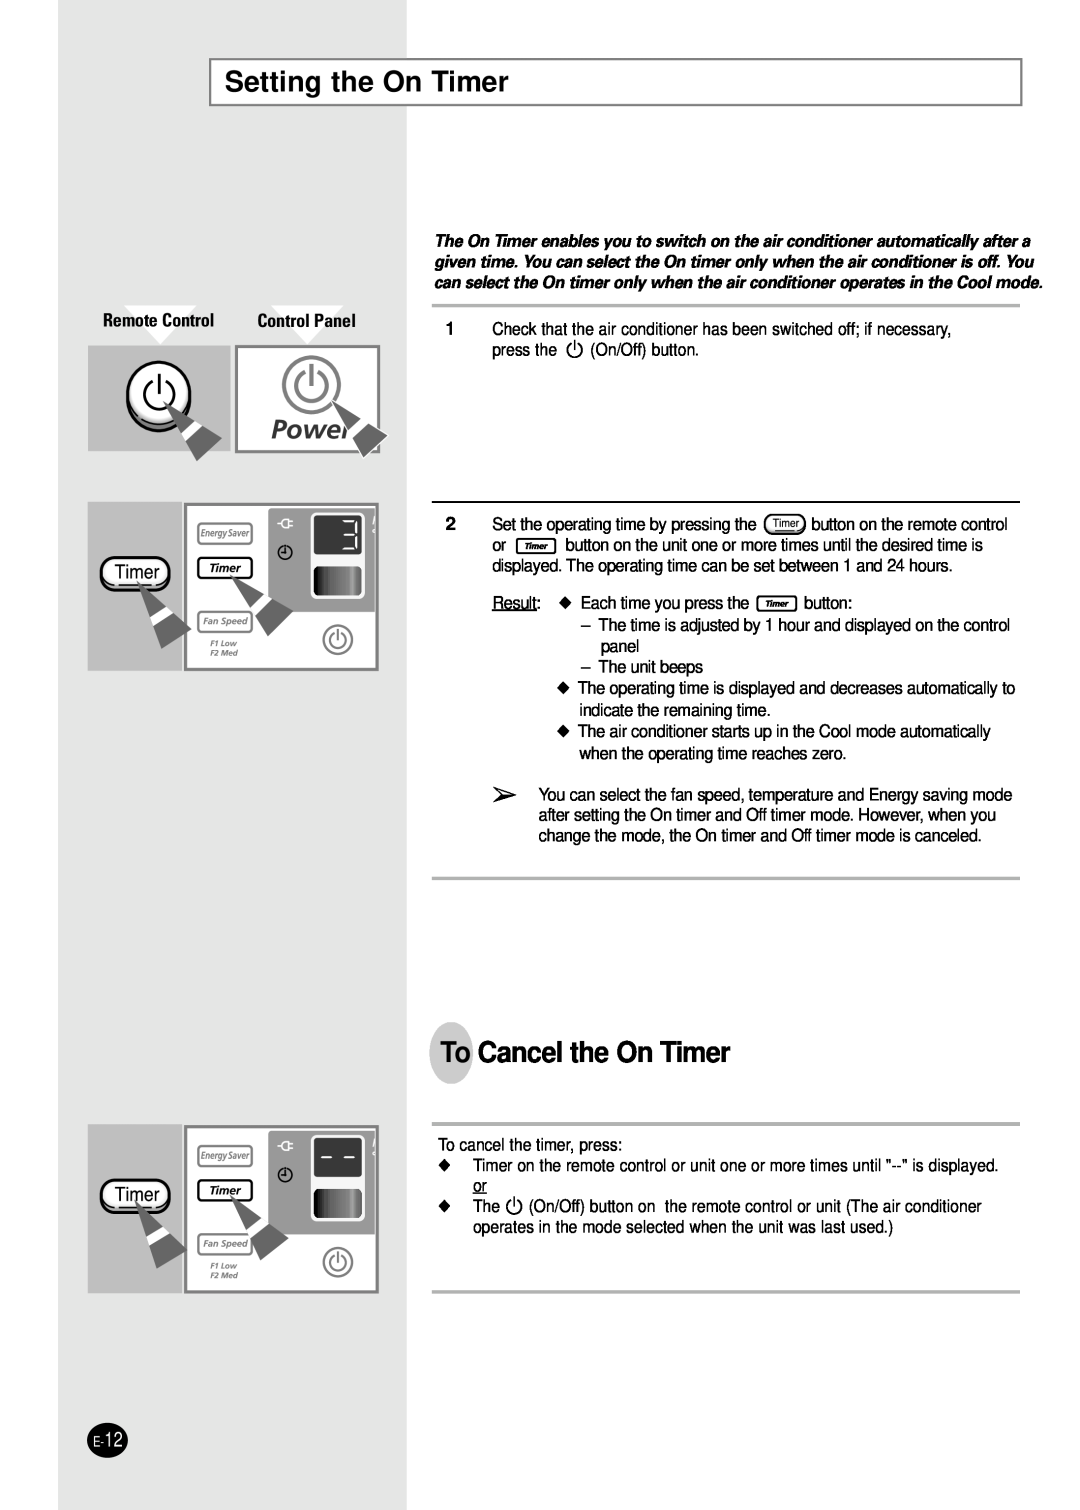 Samsung AW0501B manual Setting the On Timer, To Cancel the On Timer, Remote Control, Control Panel 